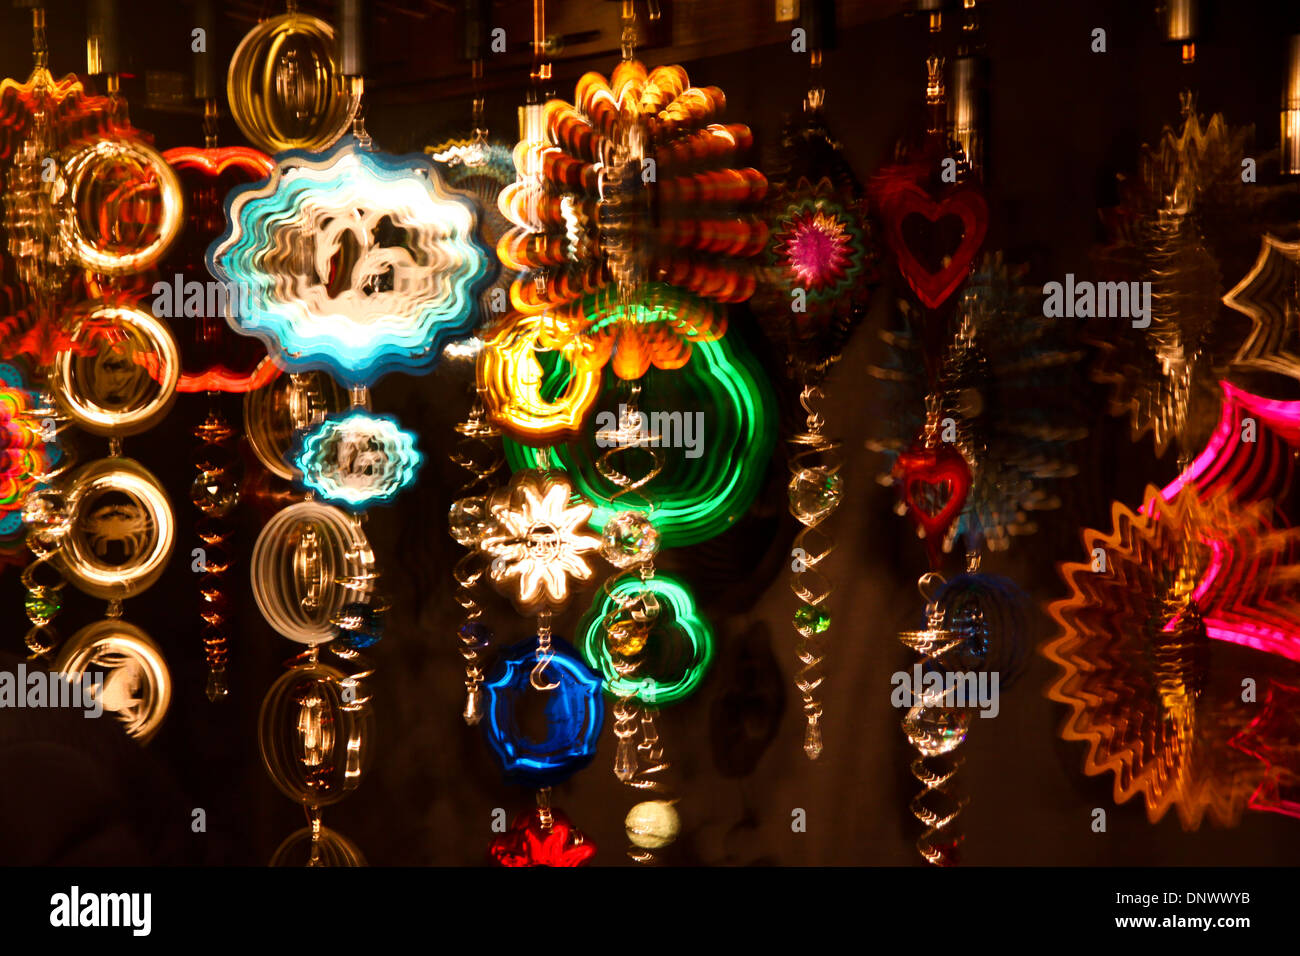 Colourful mobiles hanging on display in market stall Stock Photo